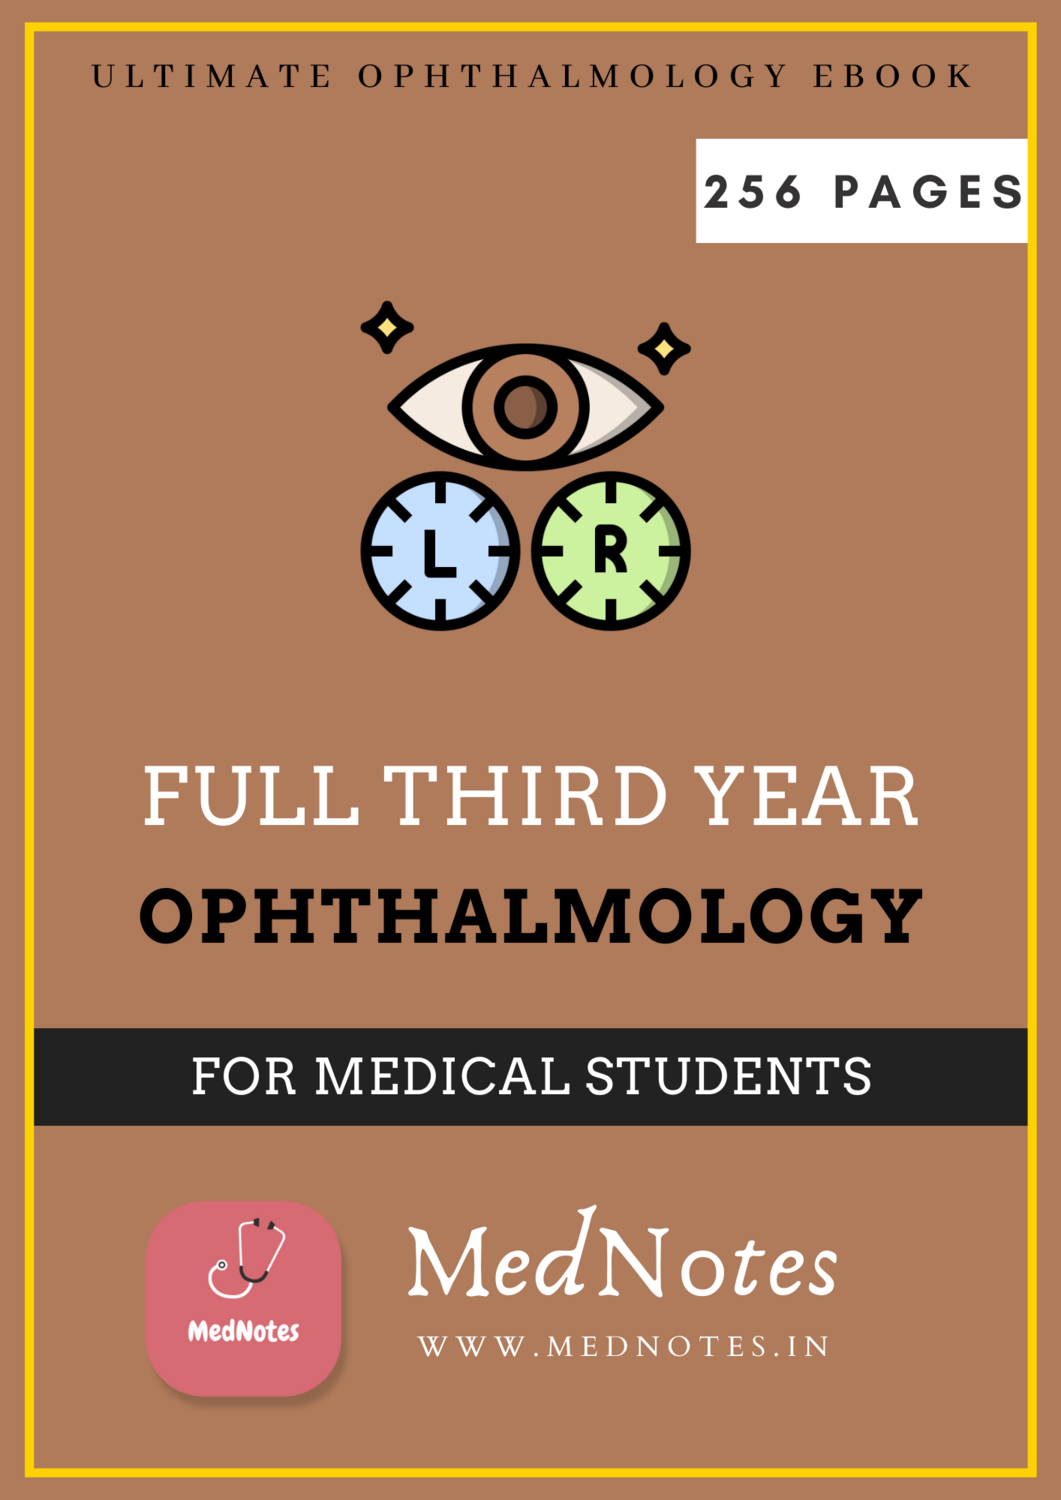 Full Third Year Ophthalmology - MedNotes Ebook